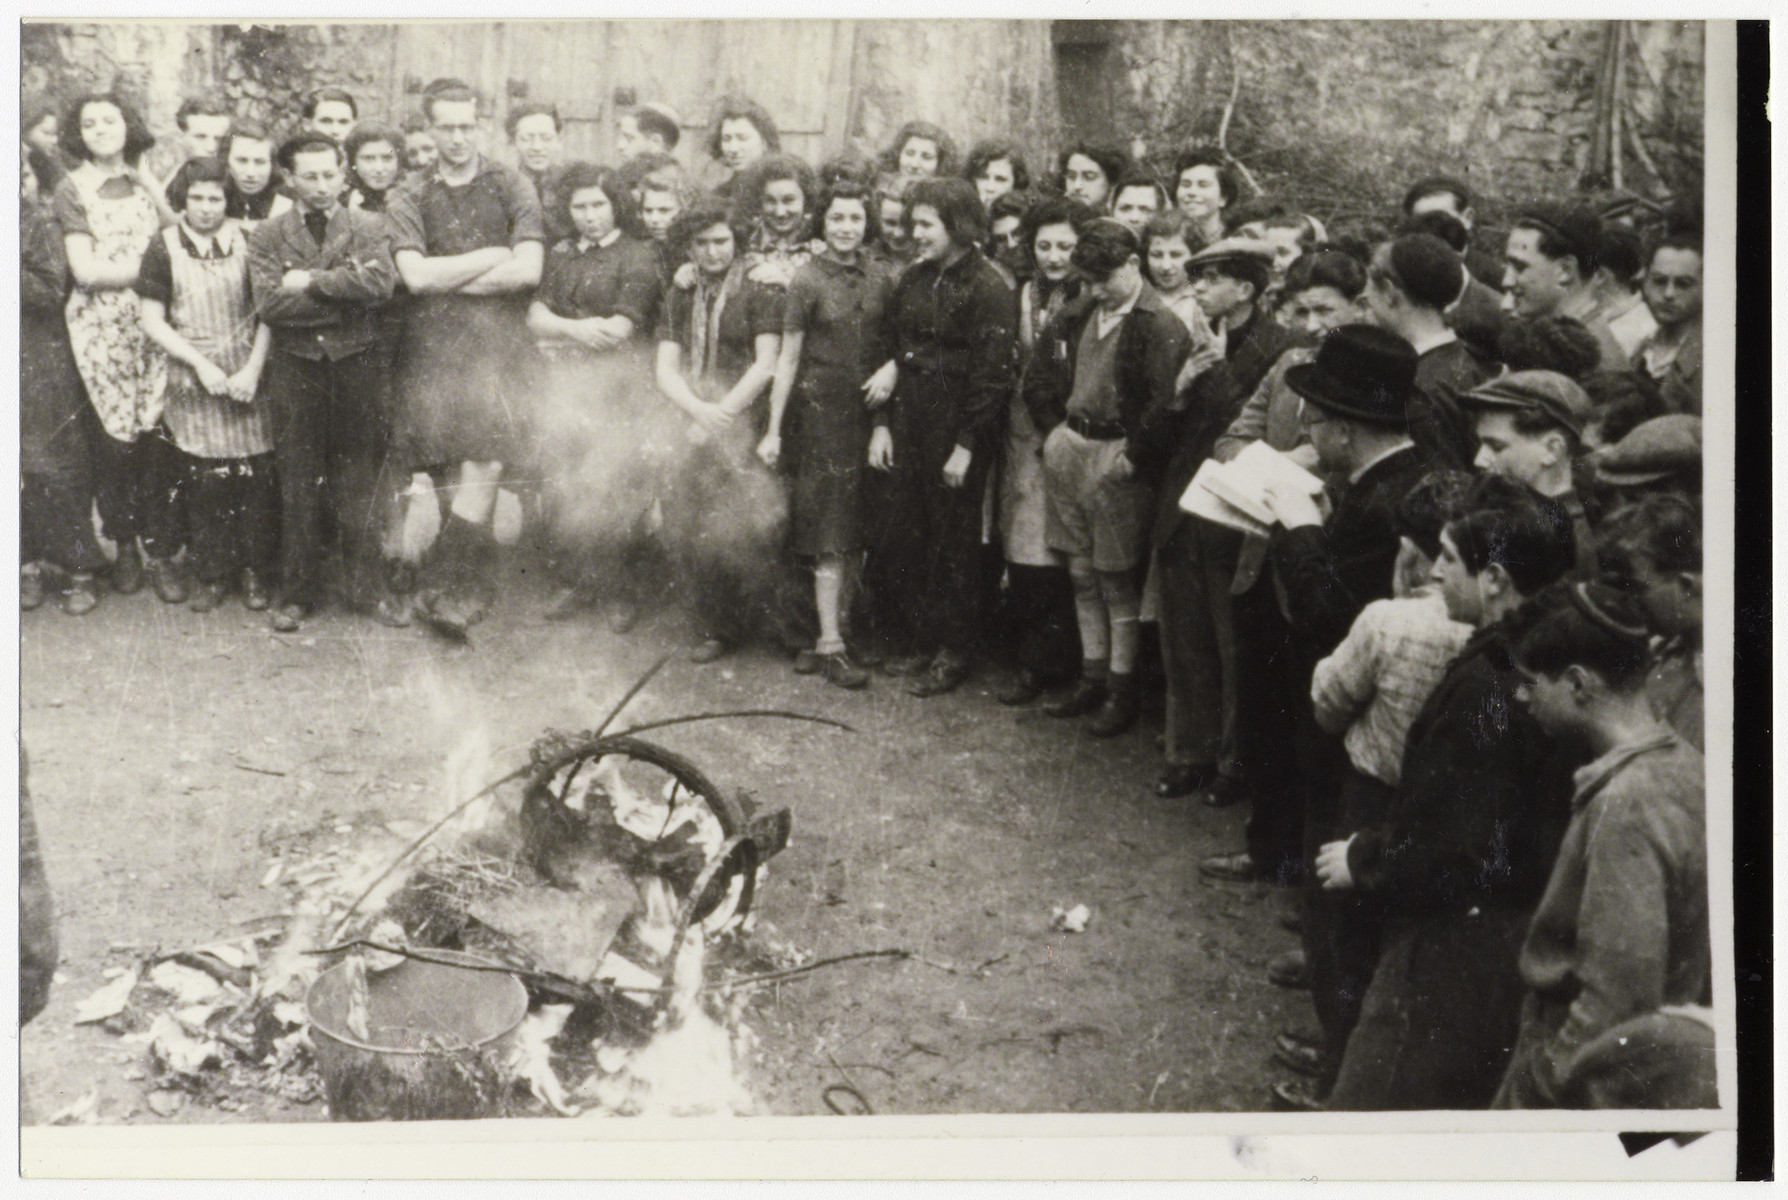 Jewish youth burn chametz [leavened bread] in preparation for the Passover holiday.

Among those pictured is Tosca Sussman in the back row.  Also pictured are Mary Auskerin, Arisch Schneider, Rabbi Sperber, Esther Weisner, Suzy Schindel, Erica Levin, Sonia Better, Tutti, Edith Metzger, Margot, David Graneck (work organizer), Annie Levin (nee Feldman), Lotte Aronowicz, and Ruth Ring (back center).